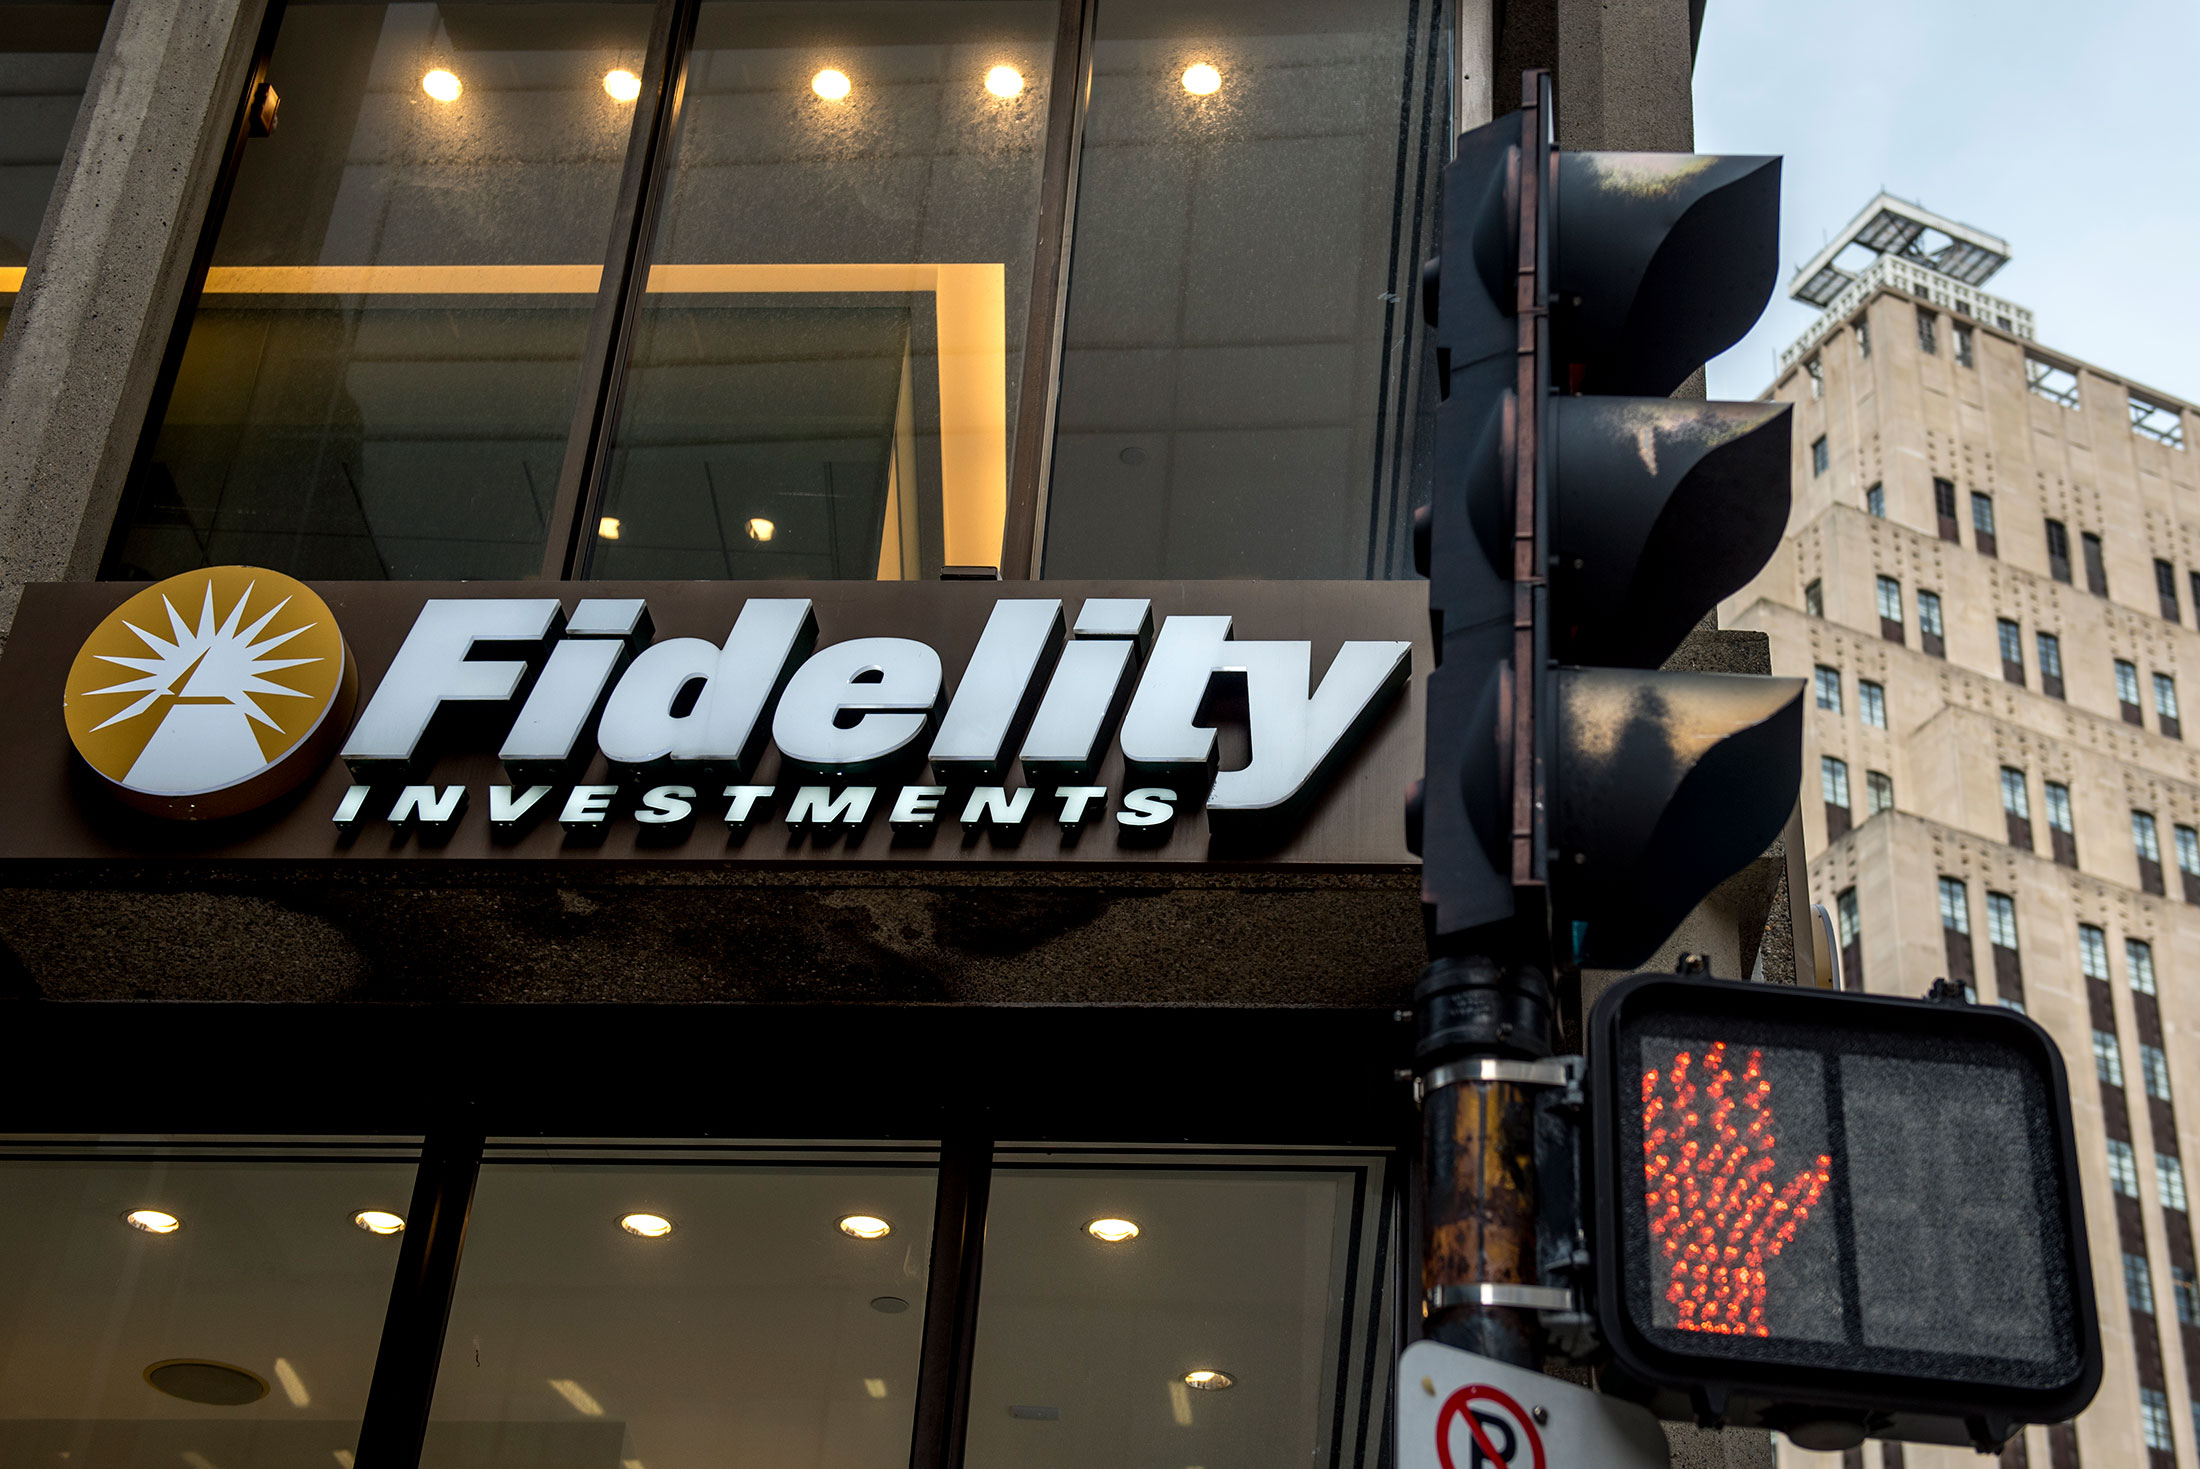 Fidelity Launches CITs With Alternative Investment Exposure